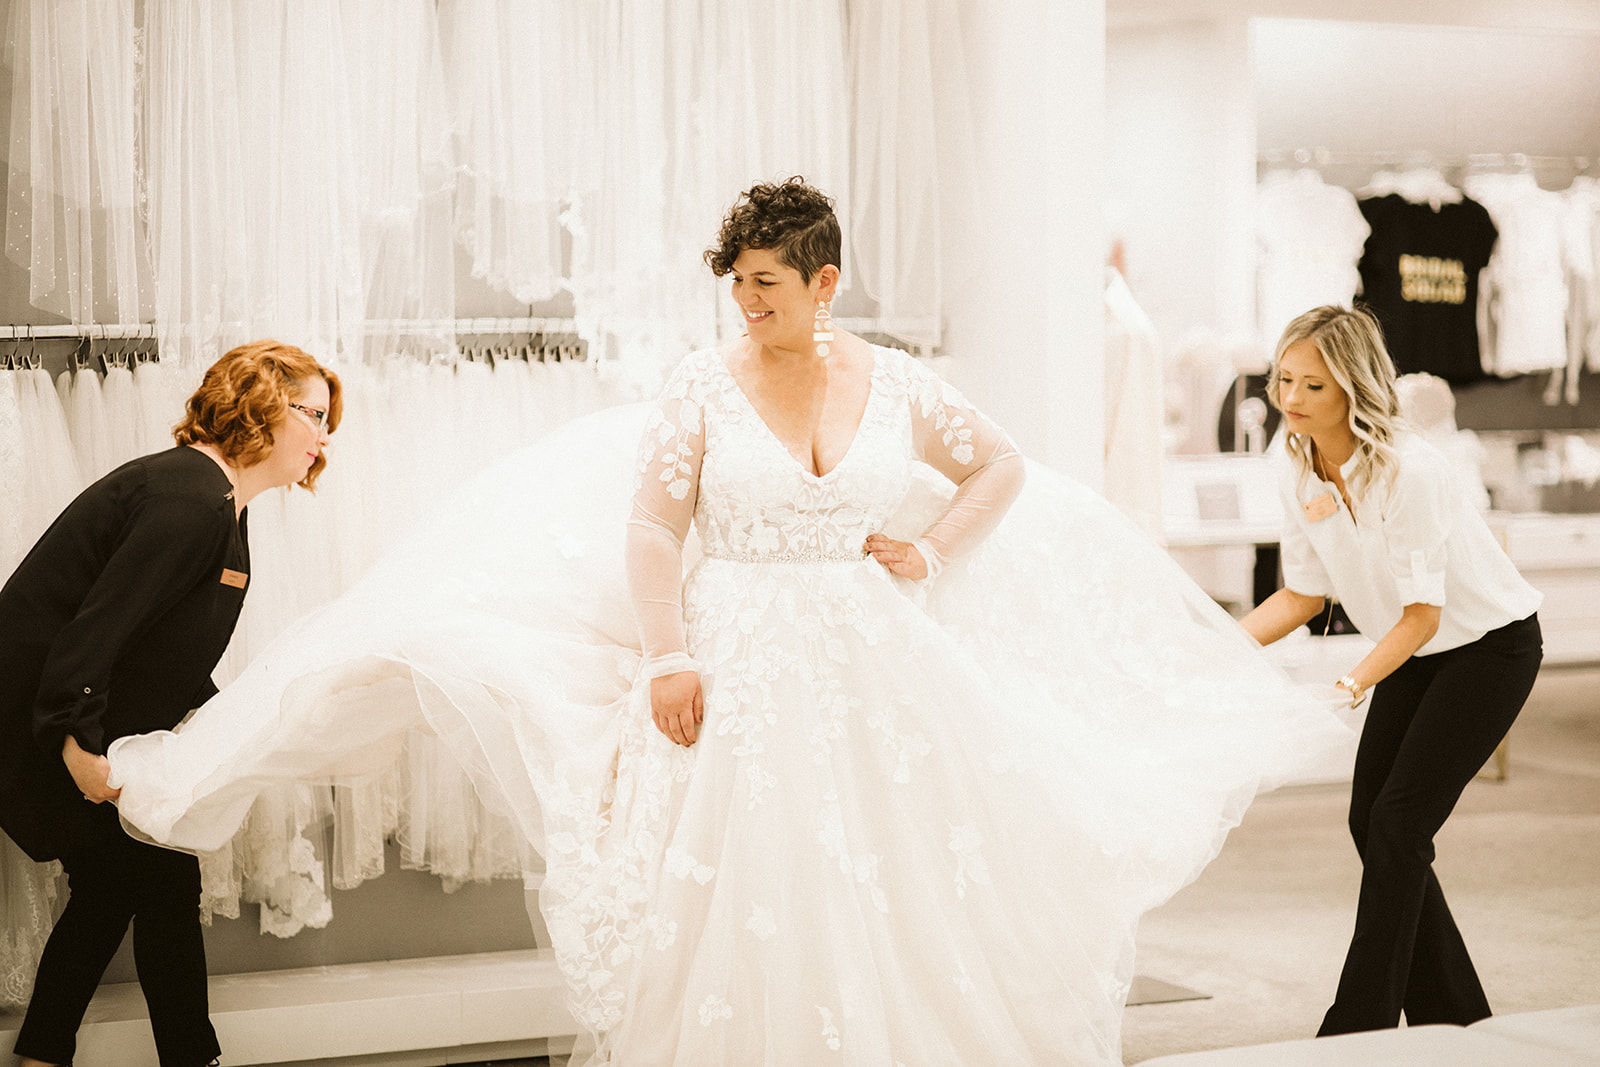 Two sales assistants fluff the skirt of a long sleeve wedding dress worn by a short-haired brunette woman at David's Bridal